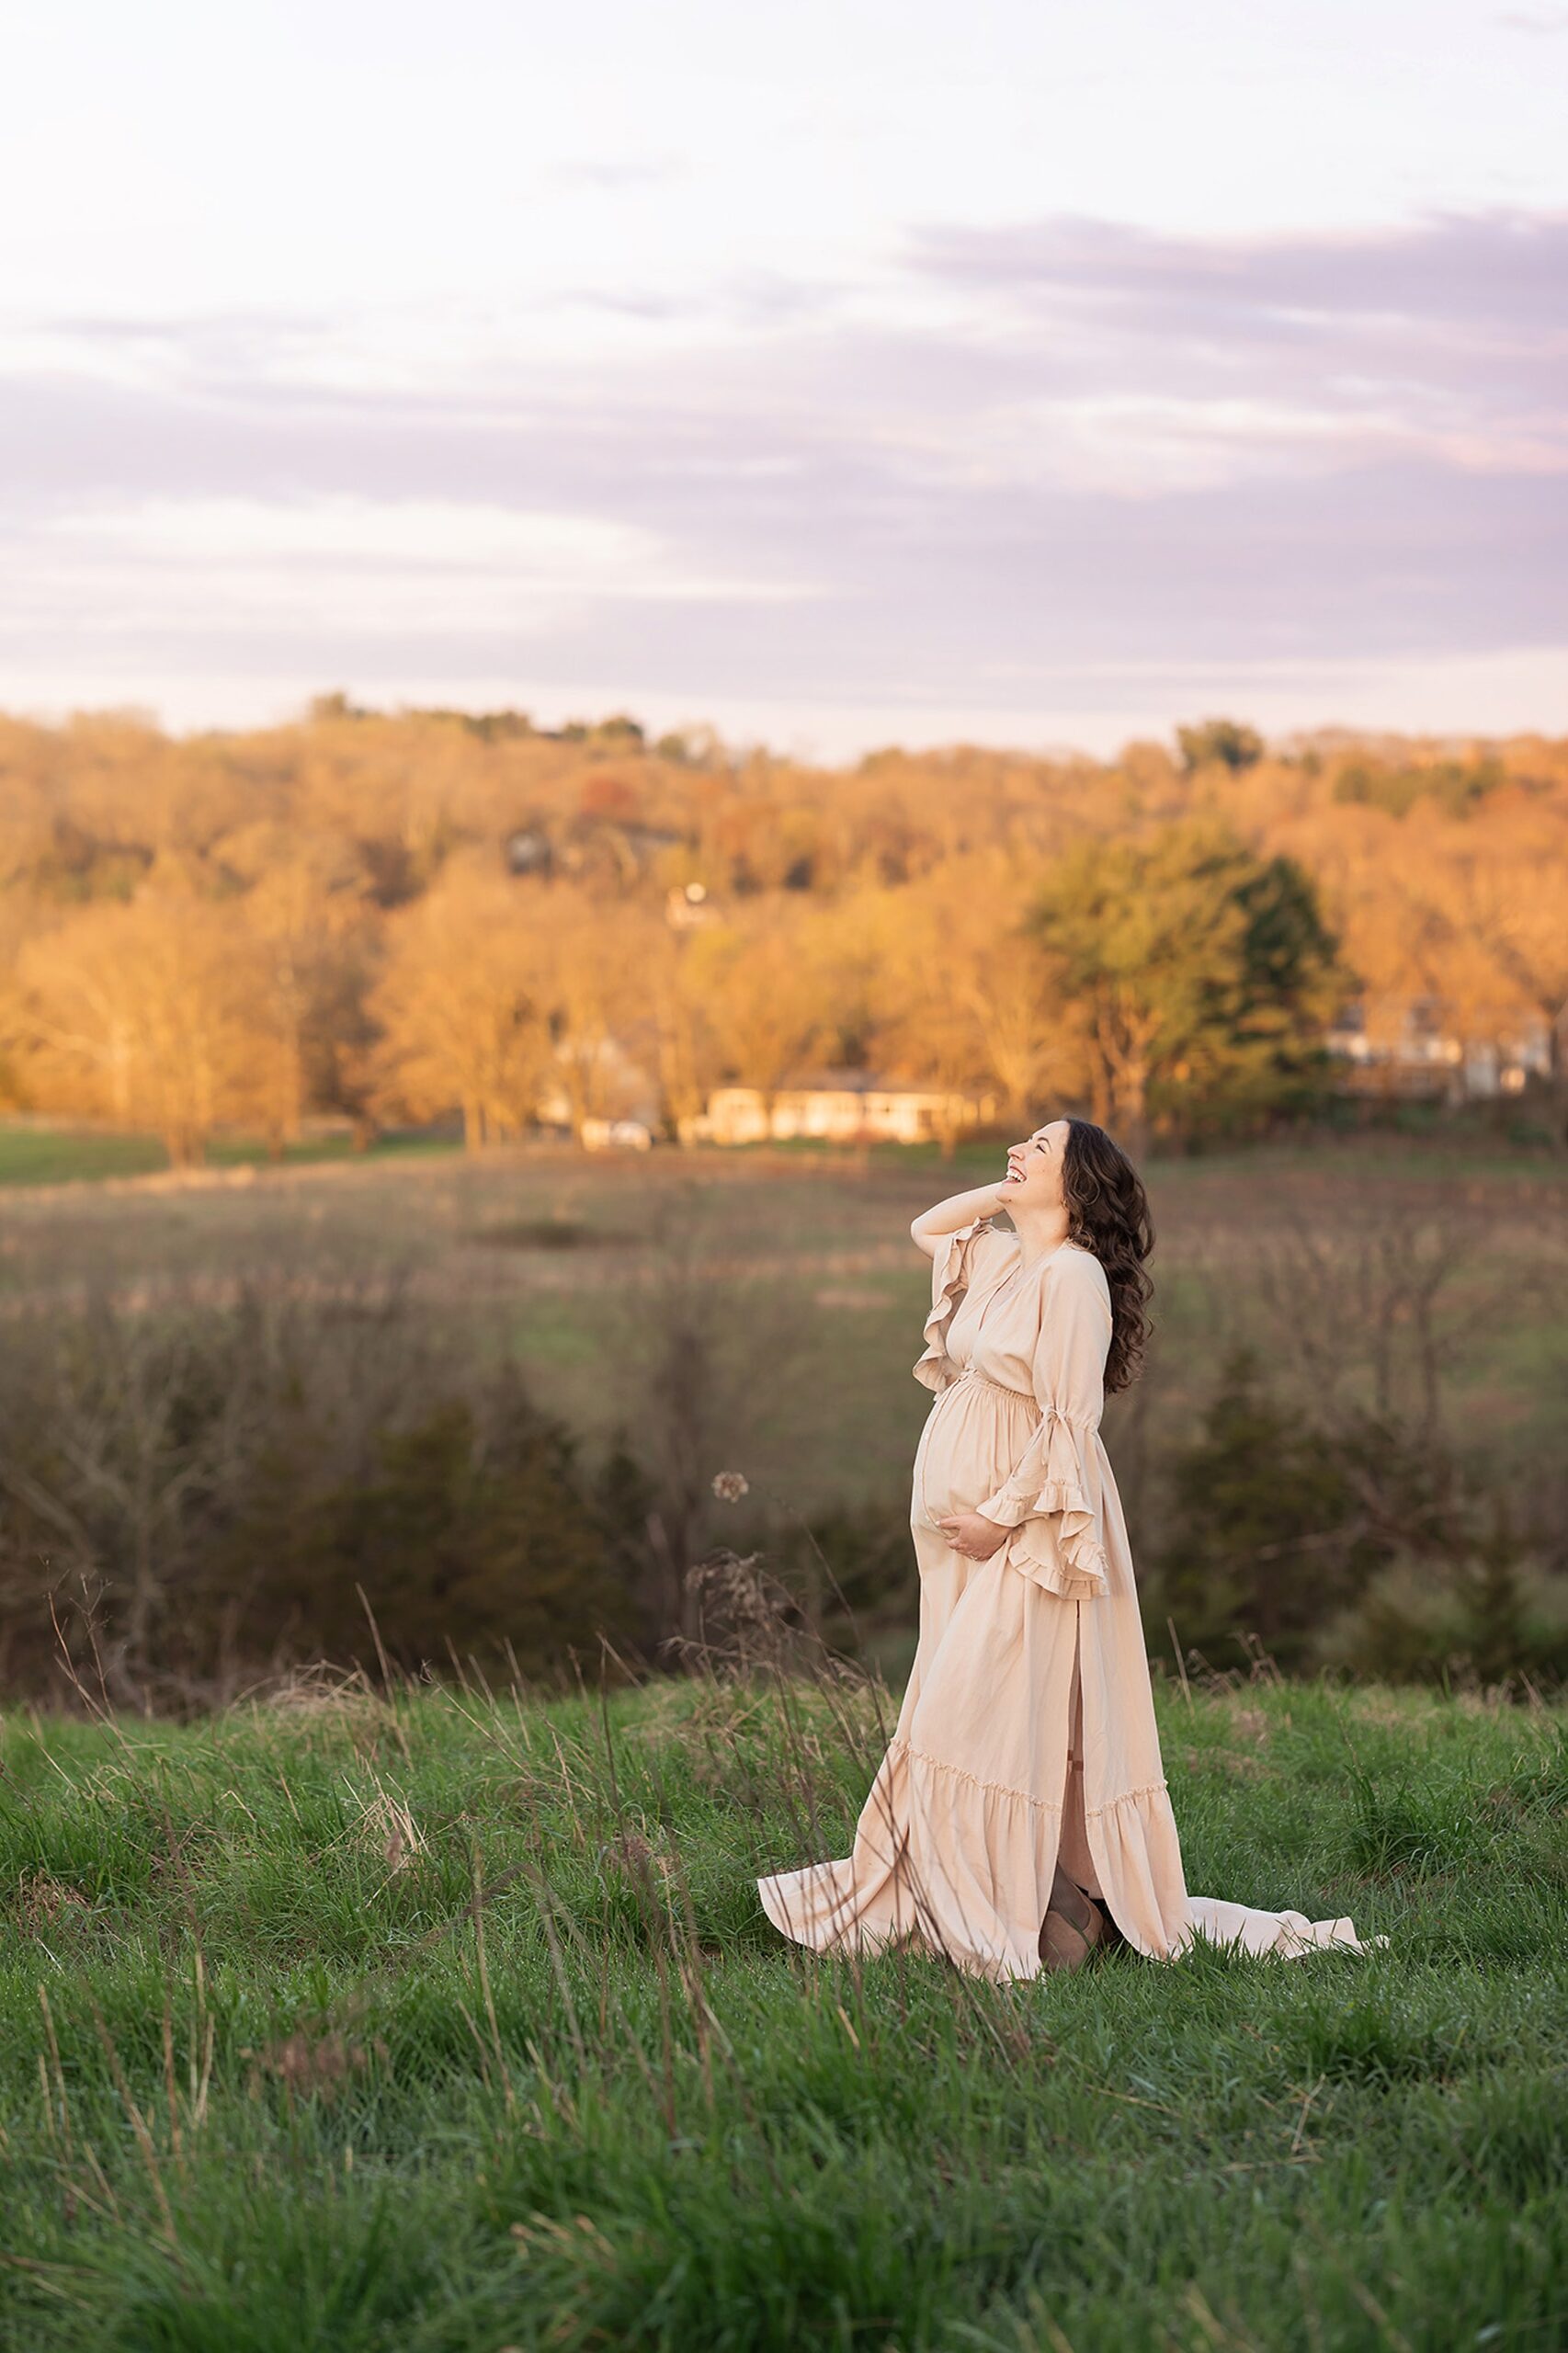 A laughing mother to be in a cream maternity gown laughs up to the sky while walking through a grassy hill at sunset